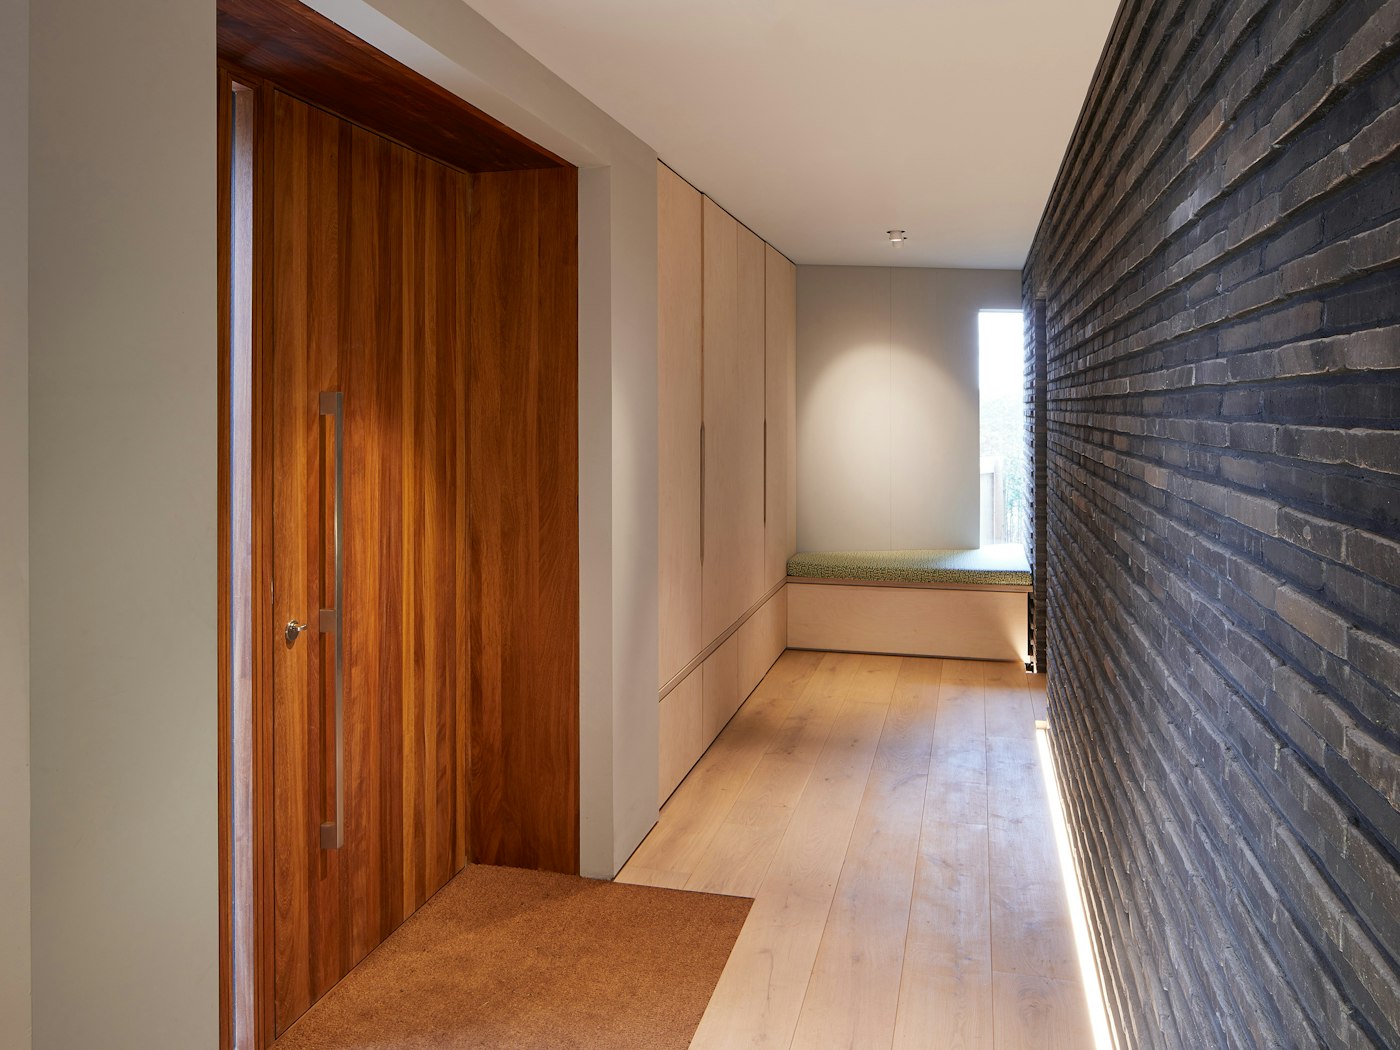 The Iroko door sits opposite a brick wall with similar raised elements works perfectly together